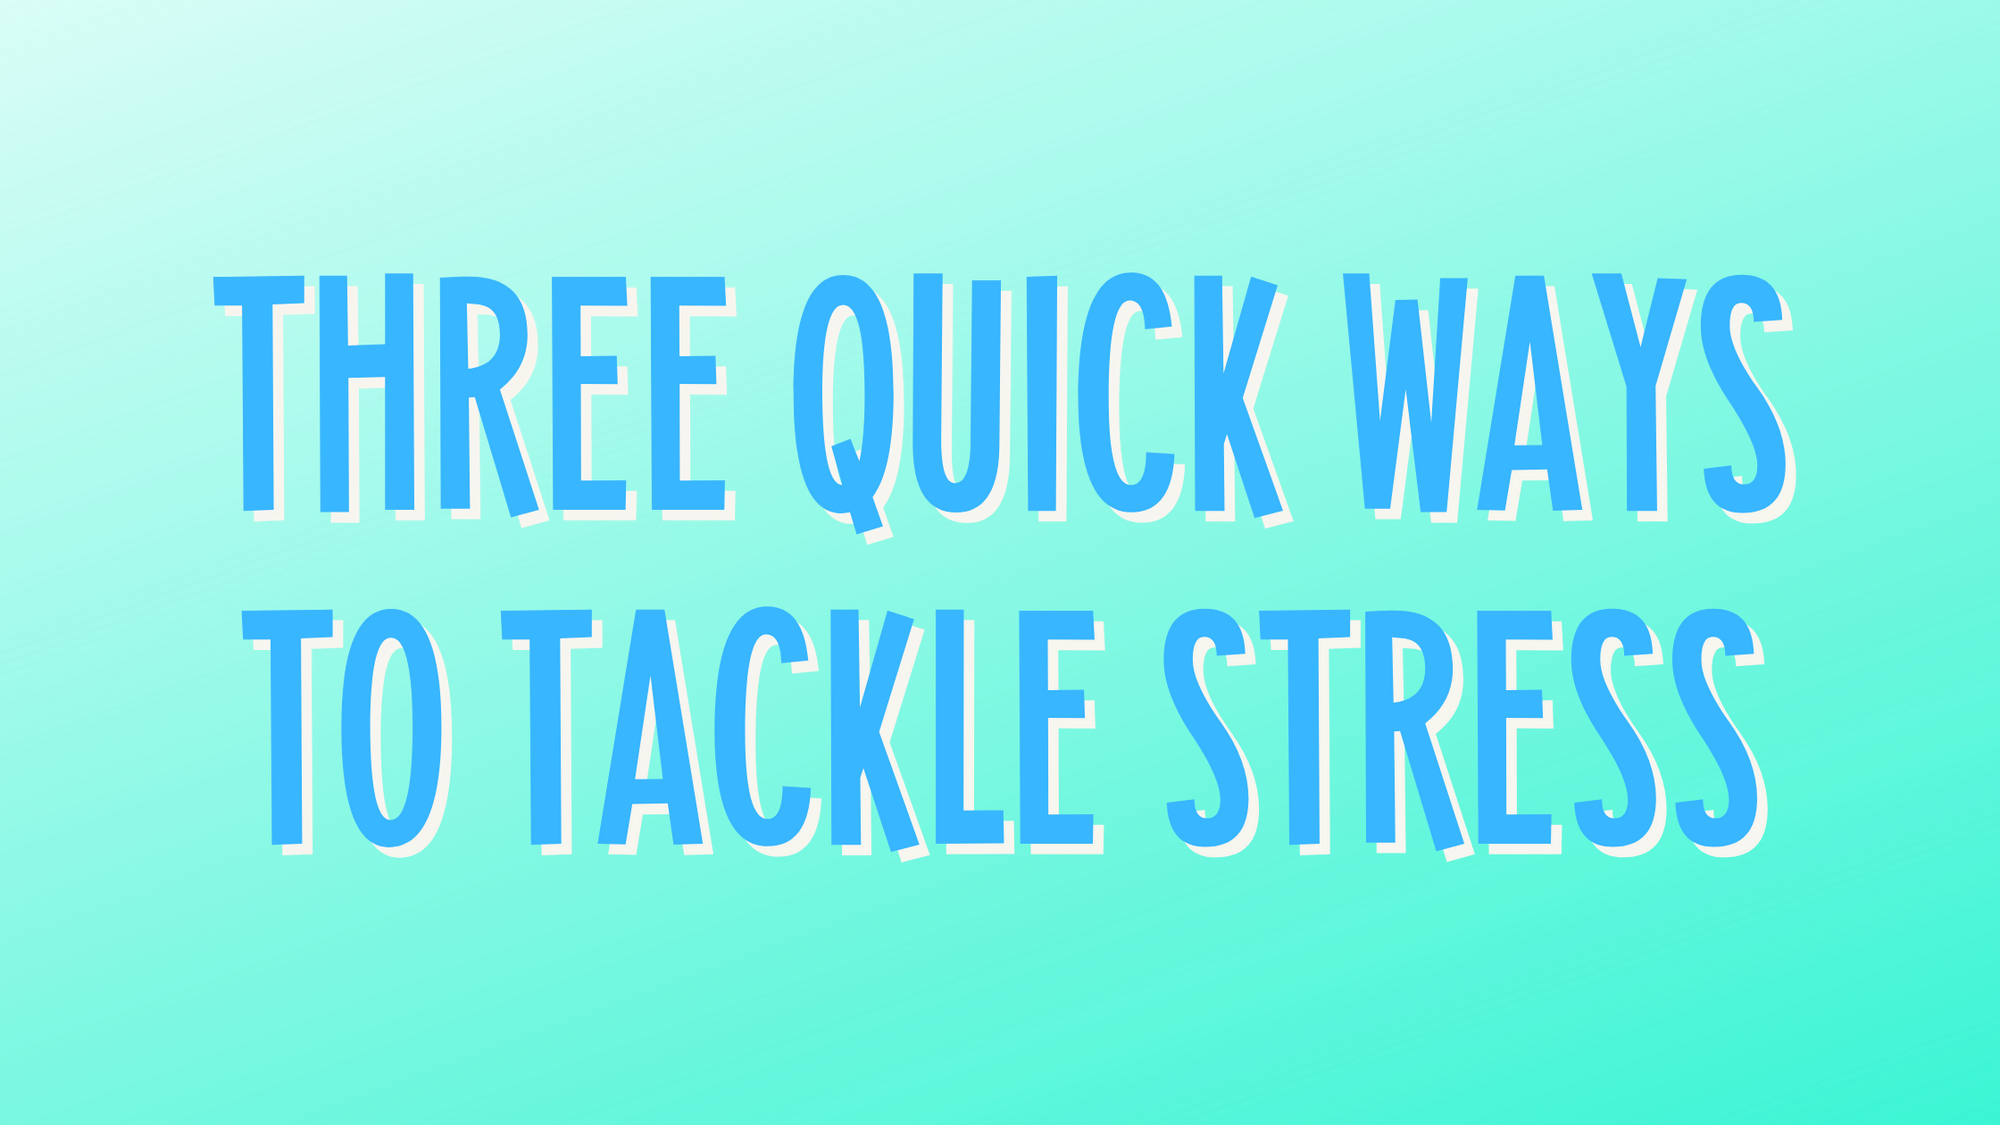 Three quick ways to tackle stress